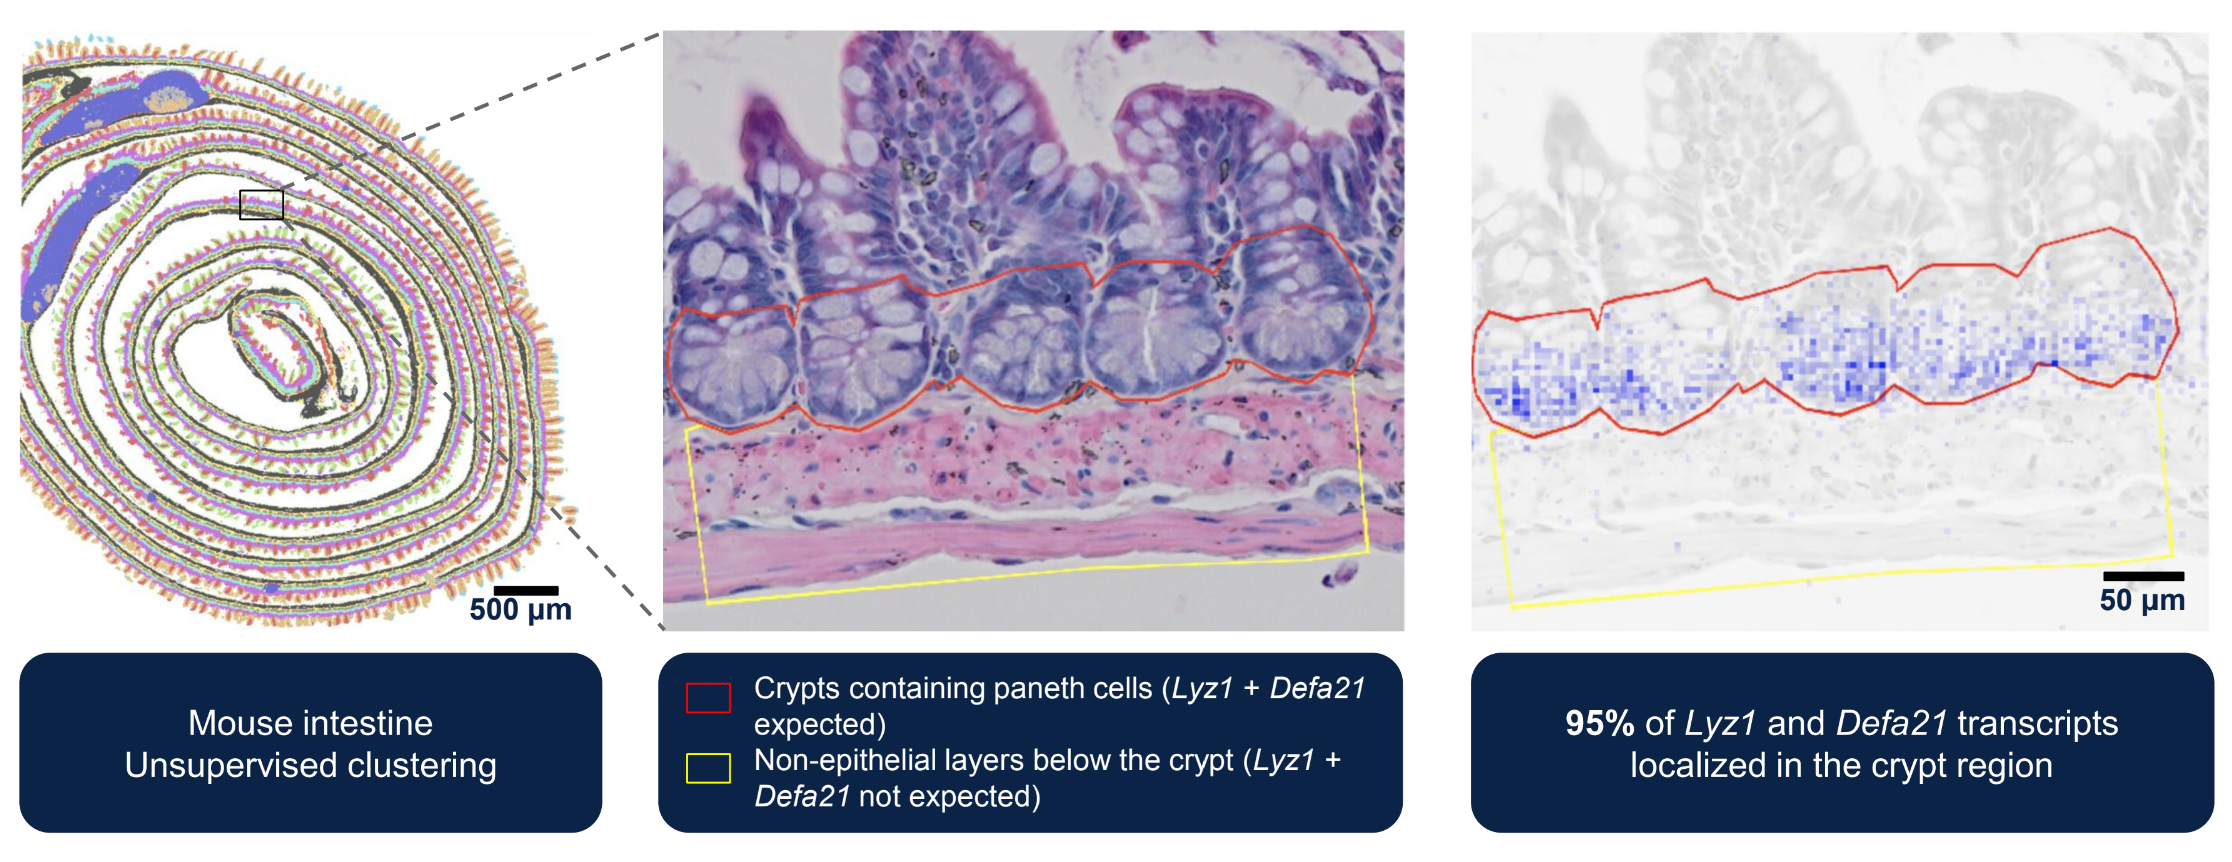 A demonstration of Visium HD’s ability to maintain spatiality and show the location of canonical marker genes in the expected locations within paneth cells in mouse intestinal crypts.